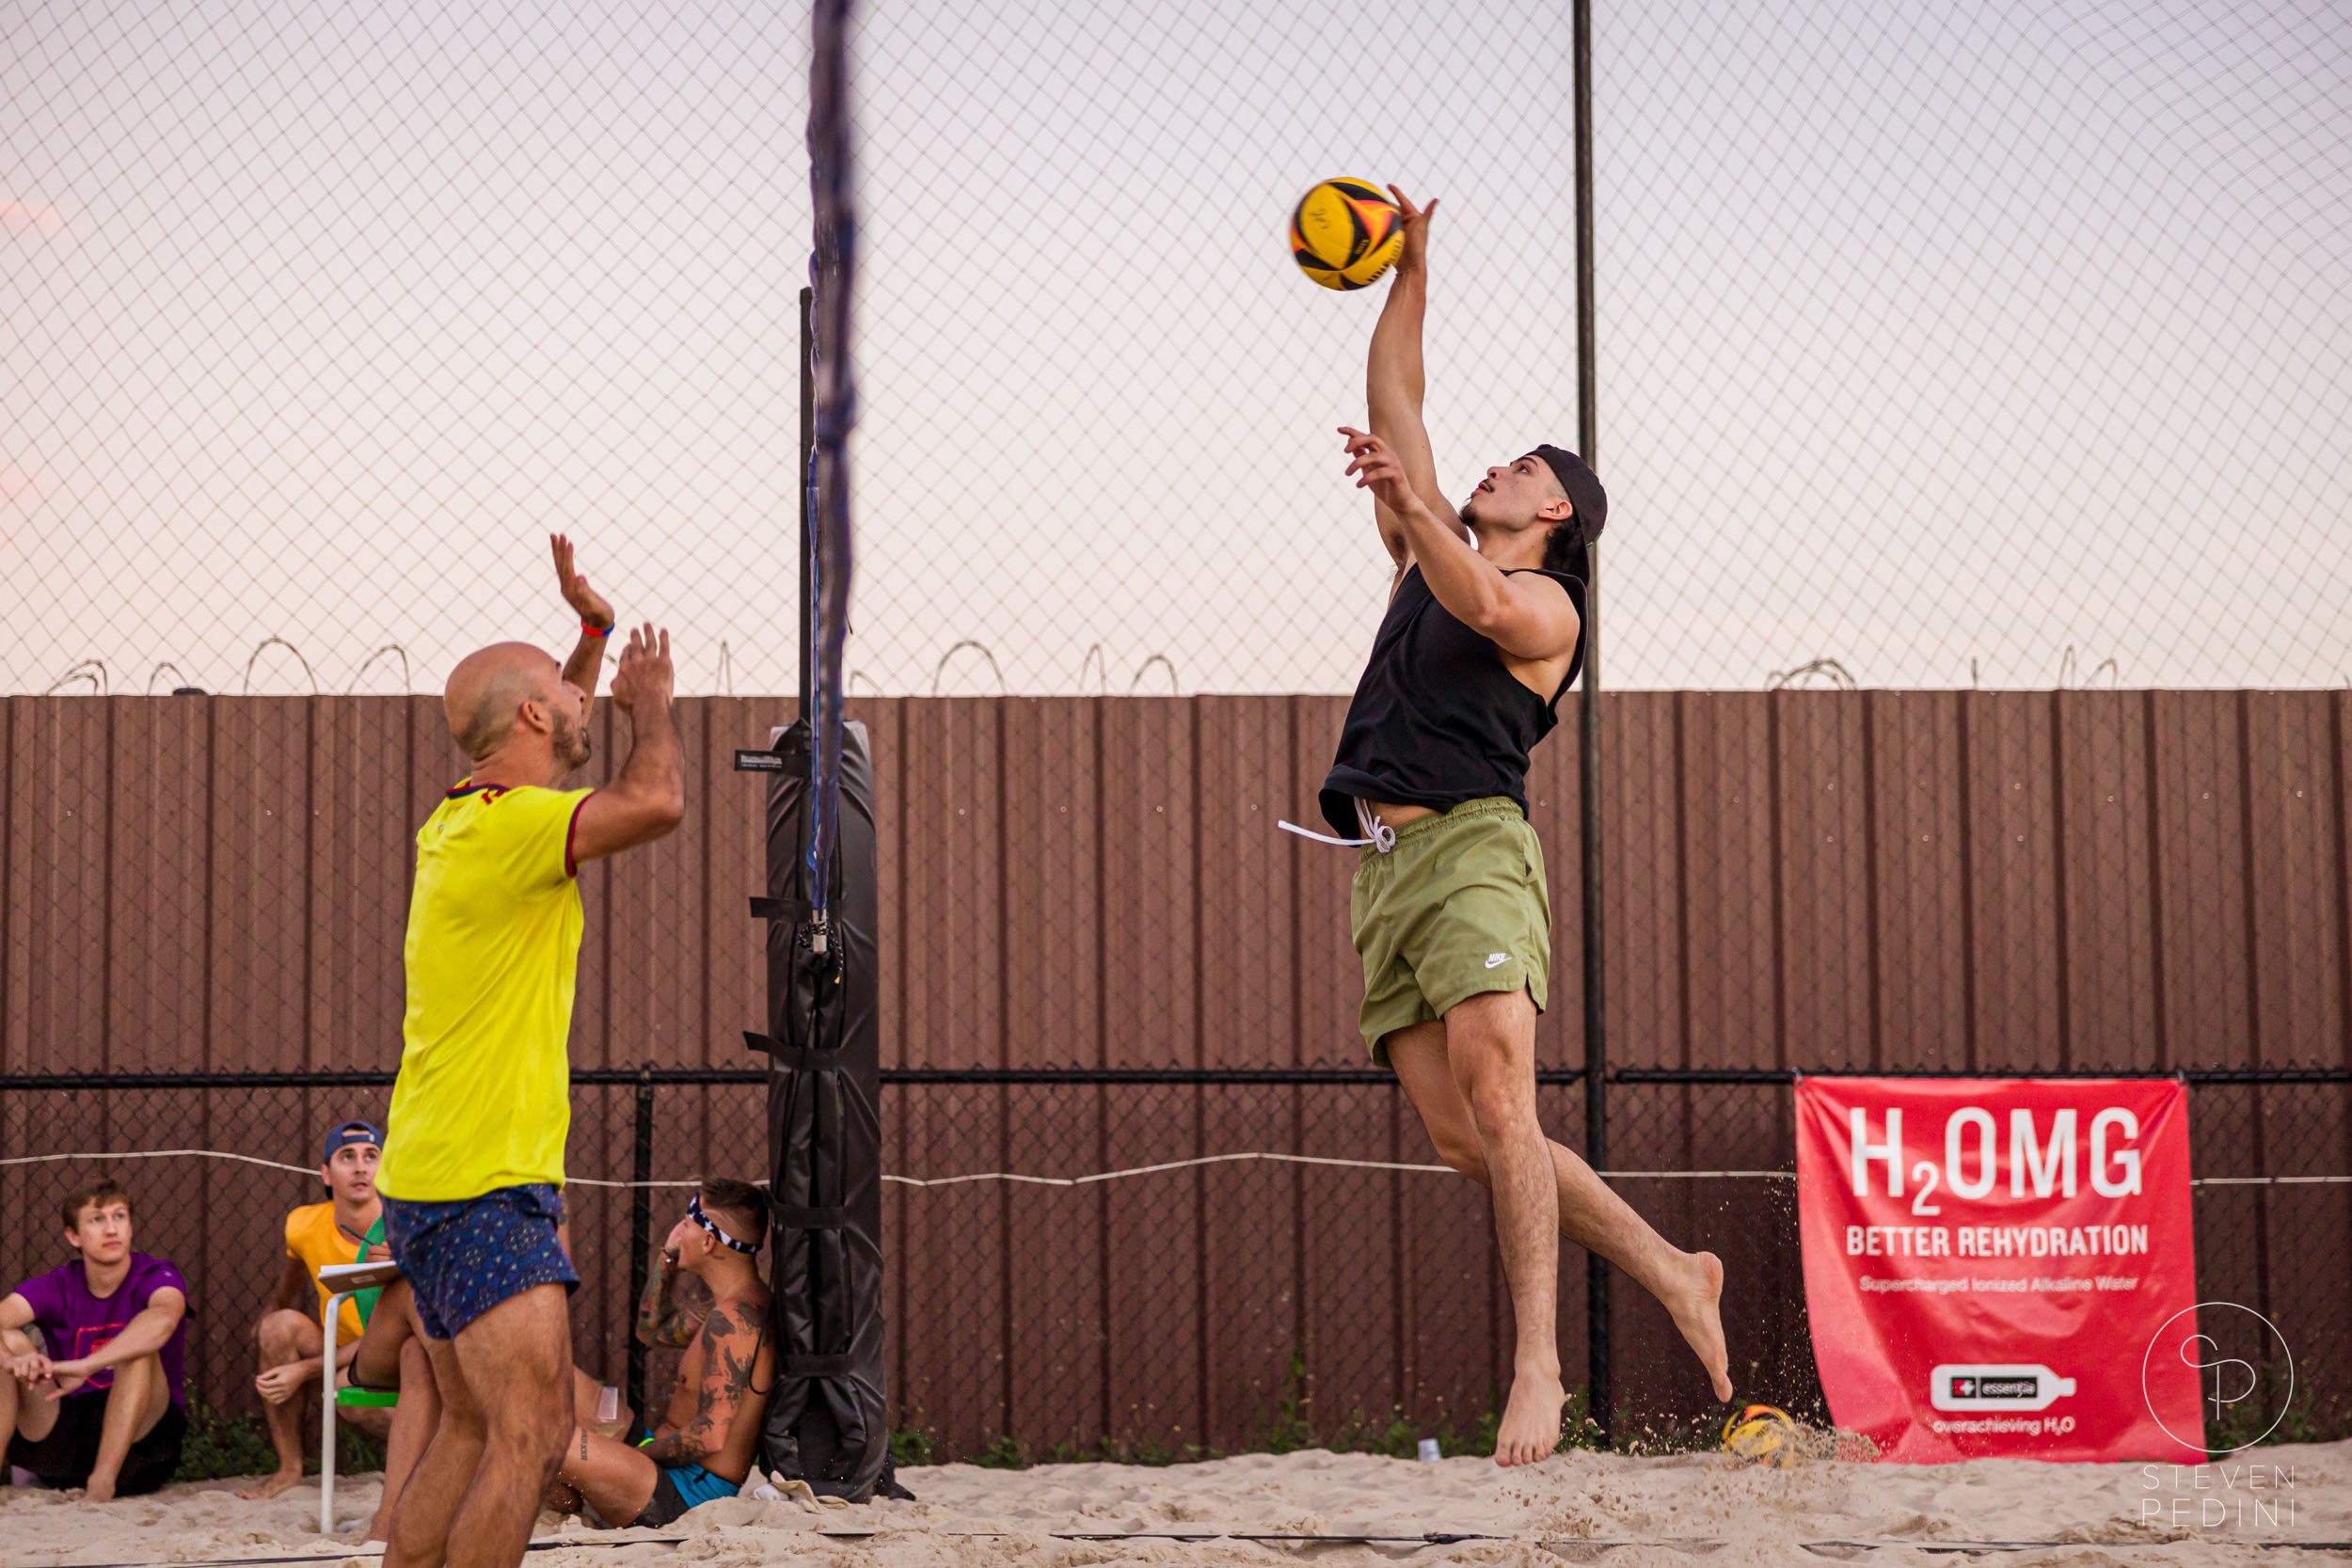 Steven Pedini Photography - Bumpy Pickle - Sand Volleyball - Houston TX - World Cup of Volleyball - 00248.jpg